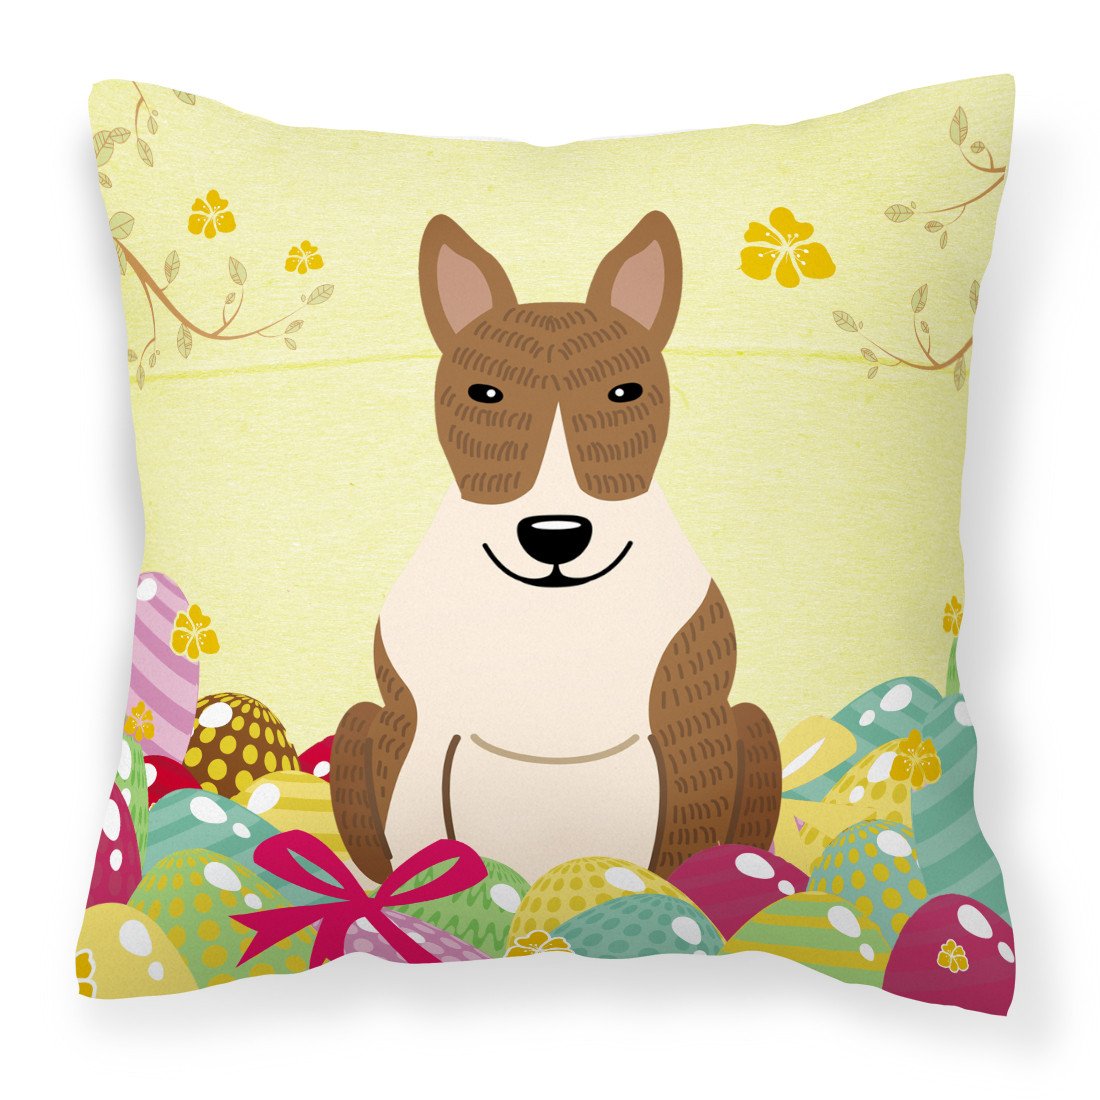 Easter Eggs Bull Terrier Brindle Fabric Decorative Pillow BB6137PW1818 by Caroline's Treasures